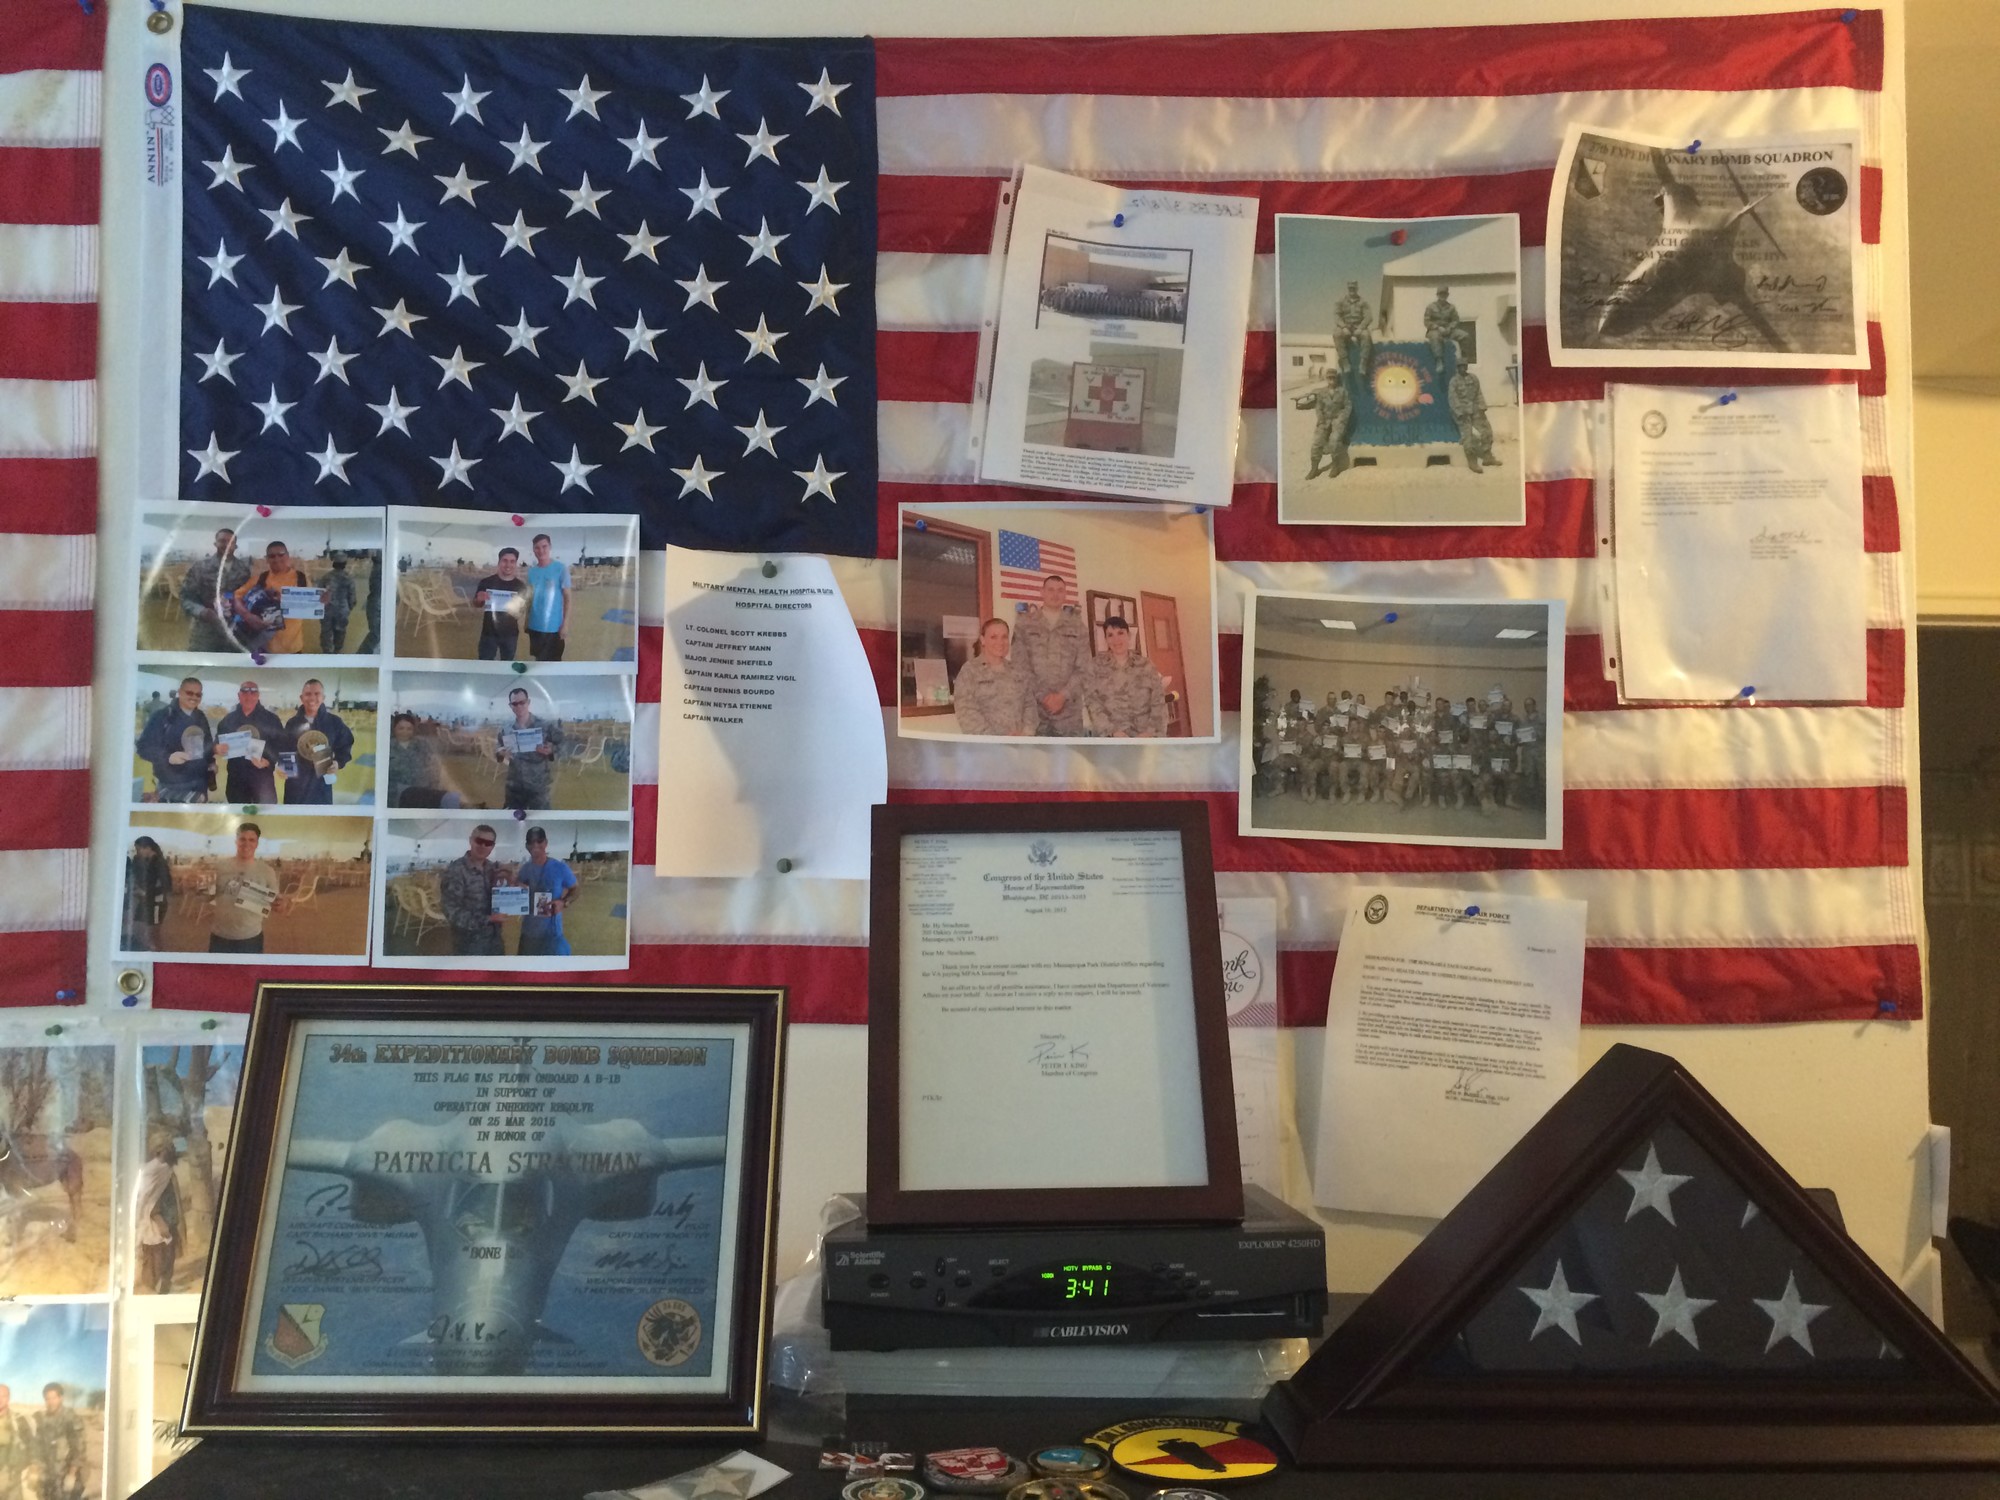 Strachman’s Massapequa apartment features numerous photographs and other mementos from his time serving in the army. He is a World War II veteran.